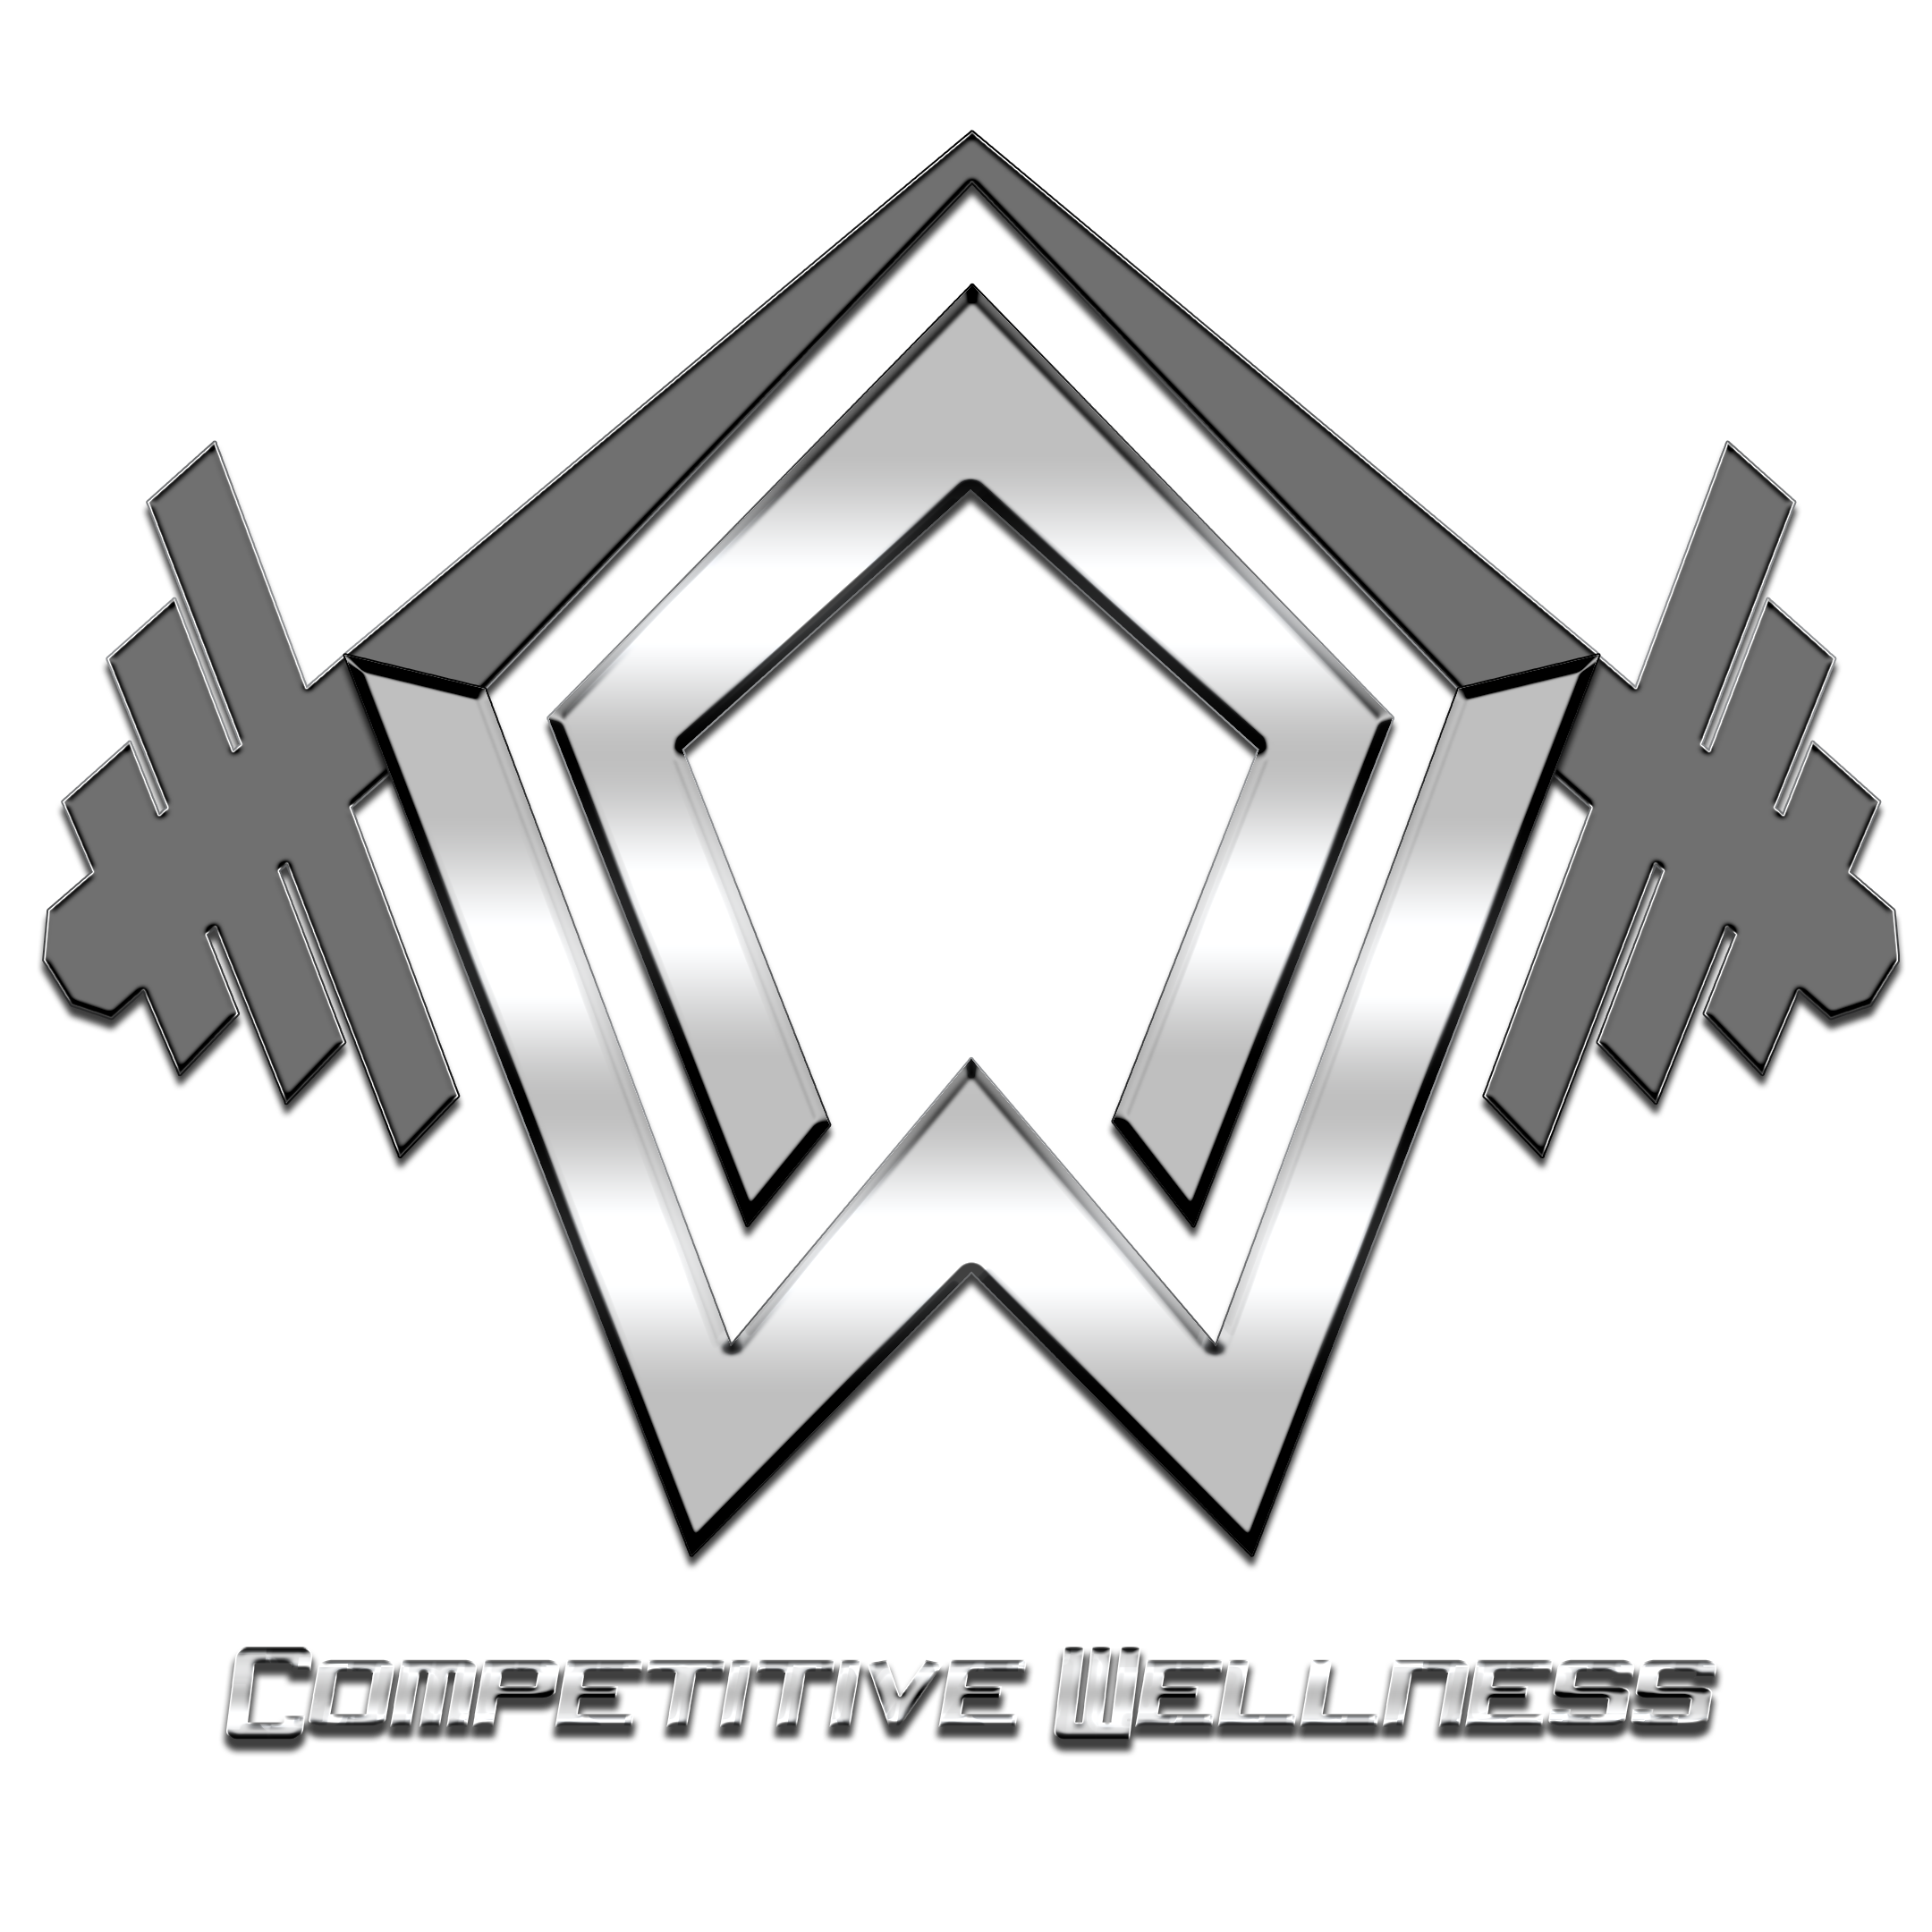 Competitive Wellness